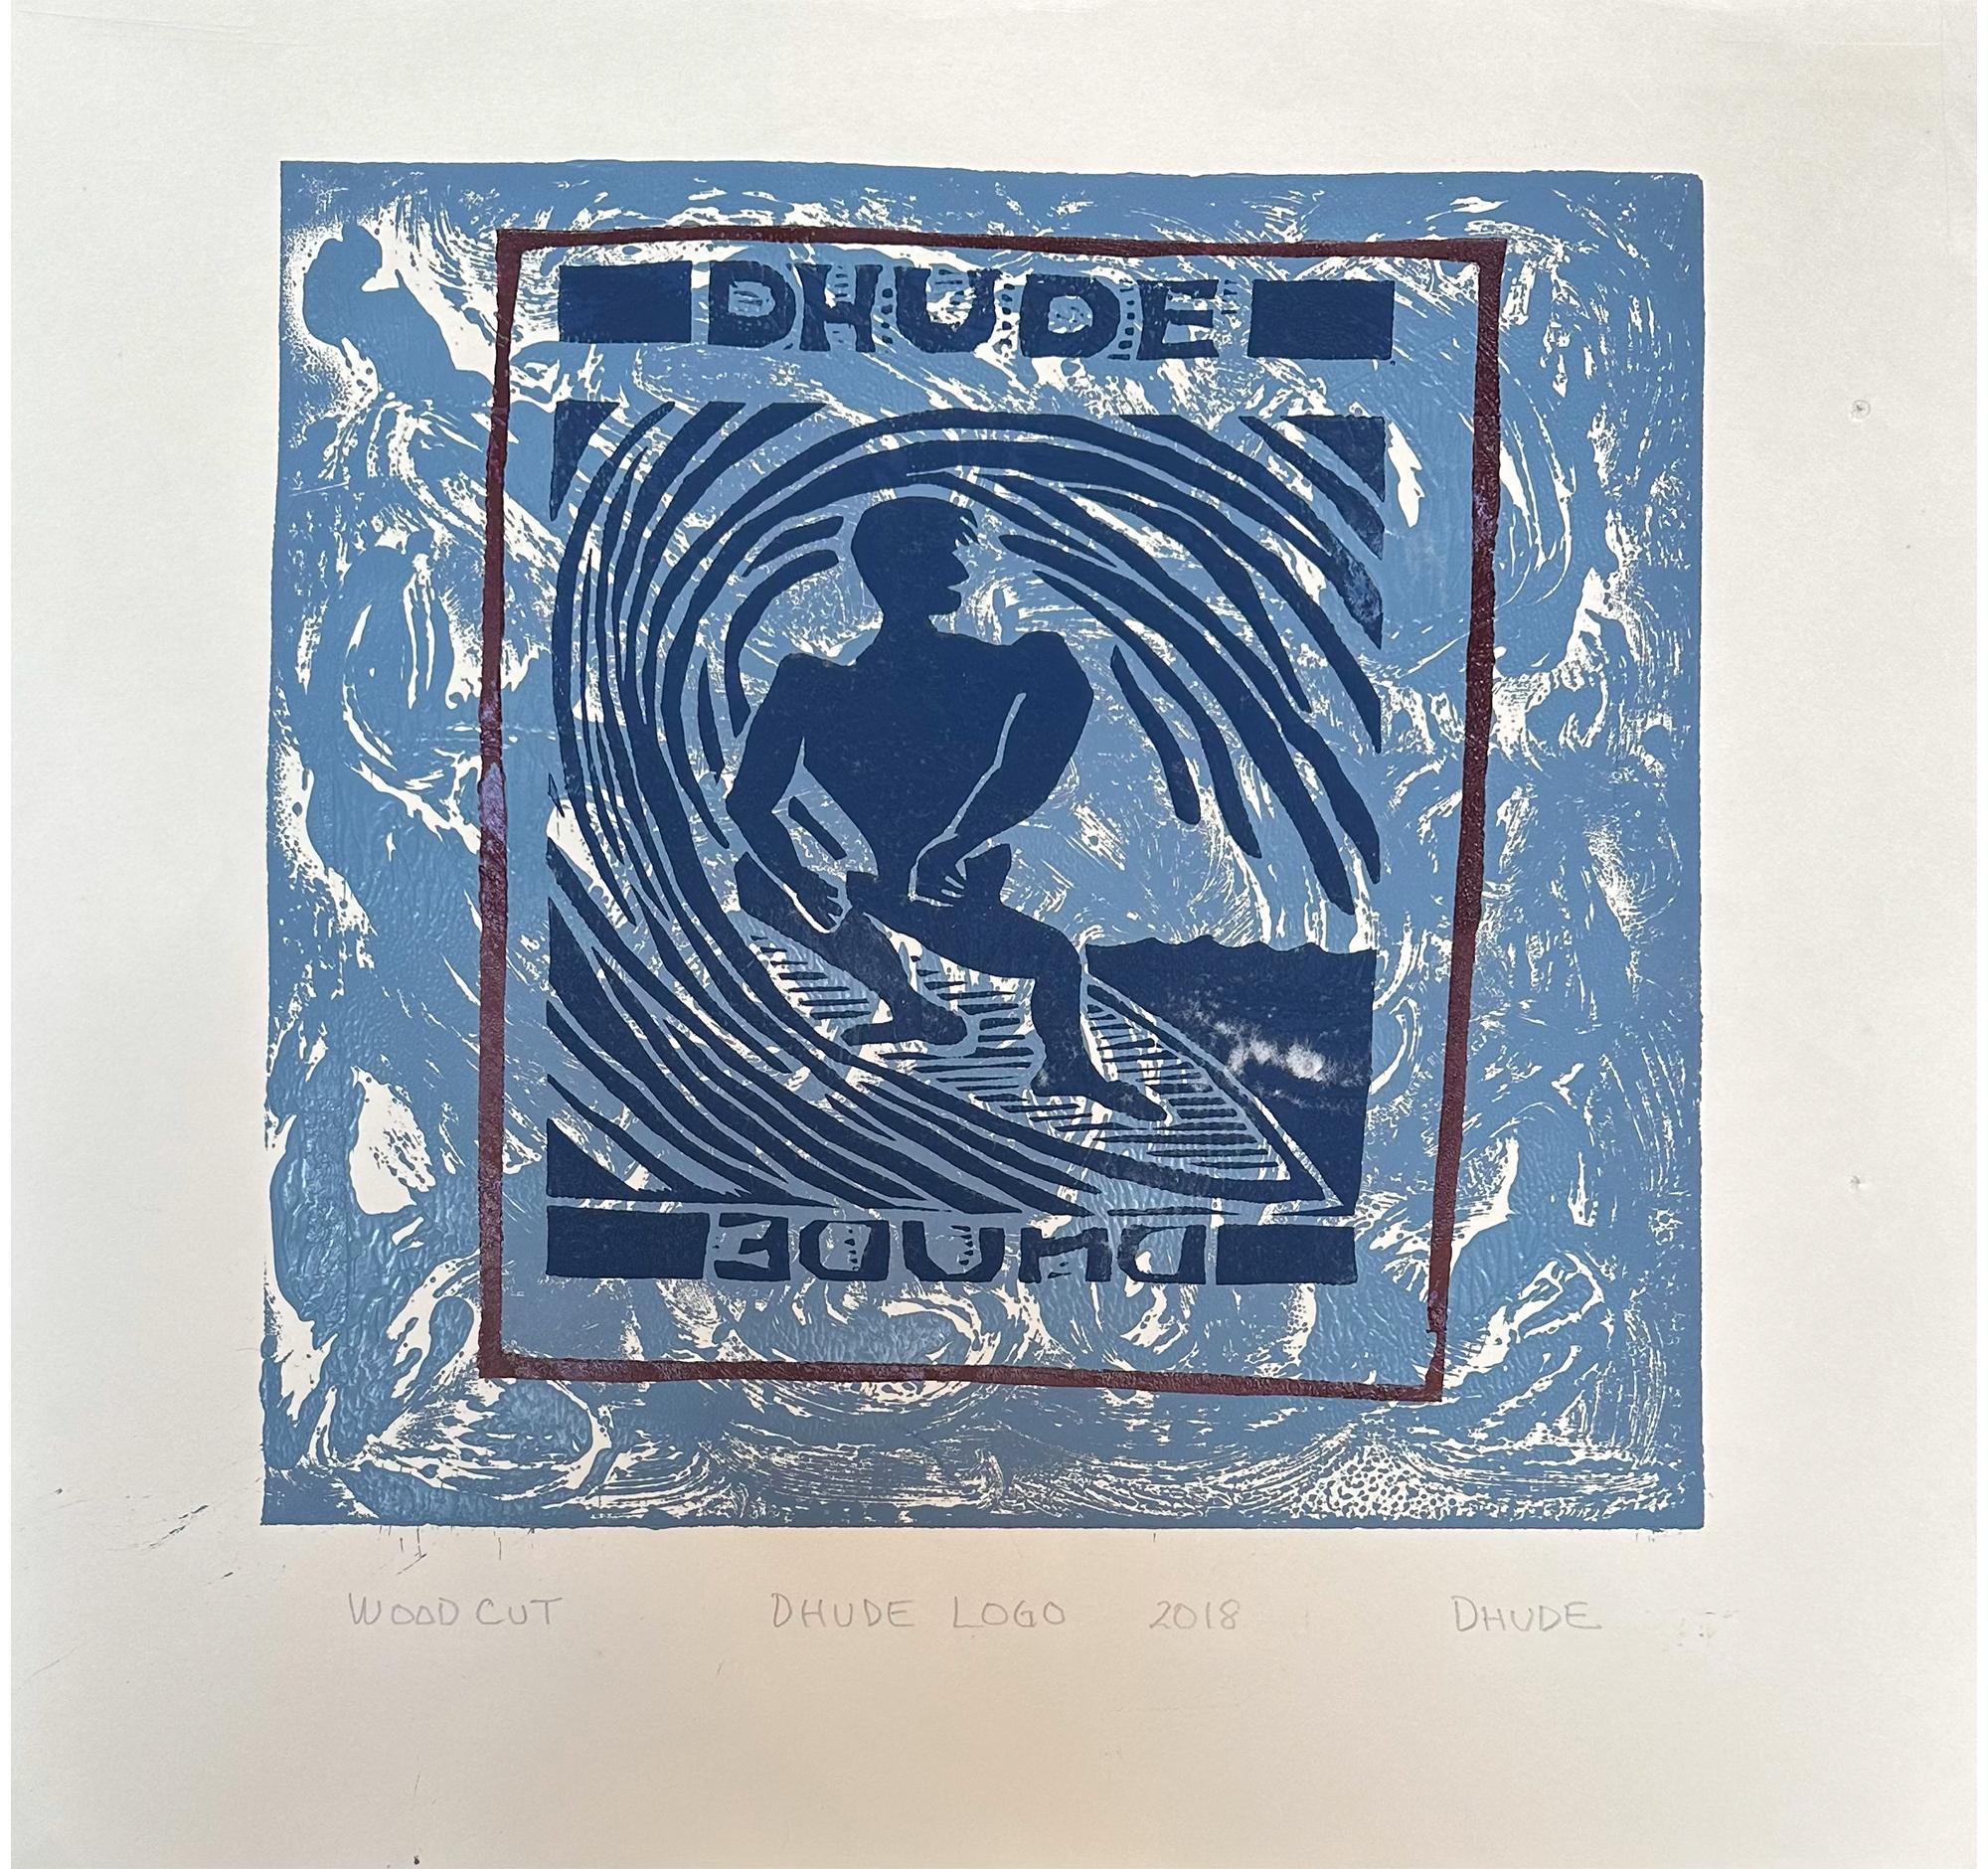 Dhude Logo - Surfing Art - Figurative - Woodcut Print By Marc Zimmerman

Limited Edition 01/04

This masterwork is exhibited in the Zimmerman Gallery, Carmel CA.

Immerse yourself in the captivating world of surfing and ocean vibes with Marc